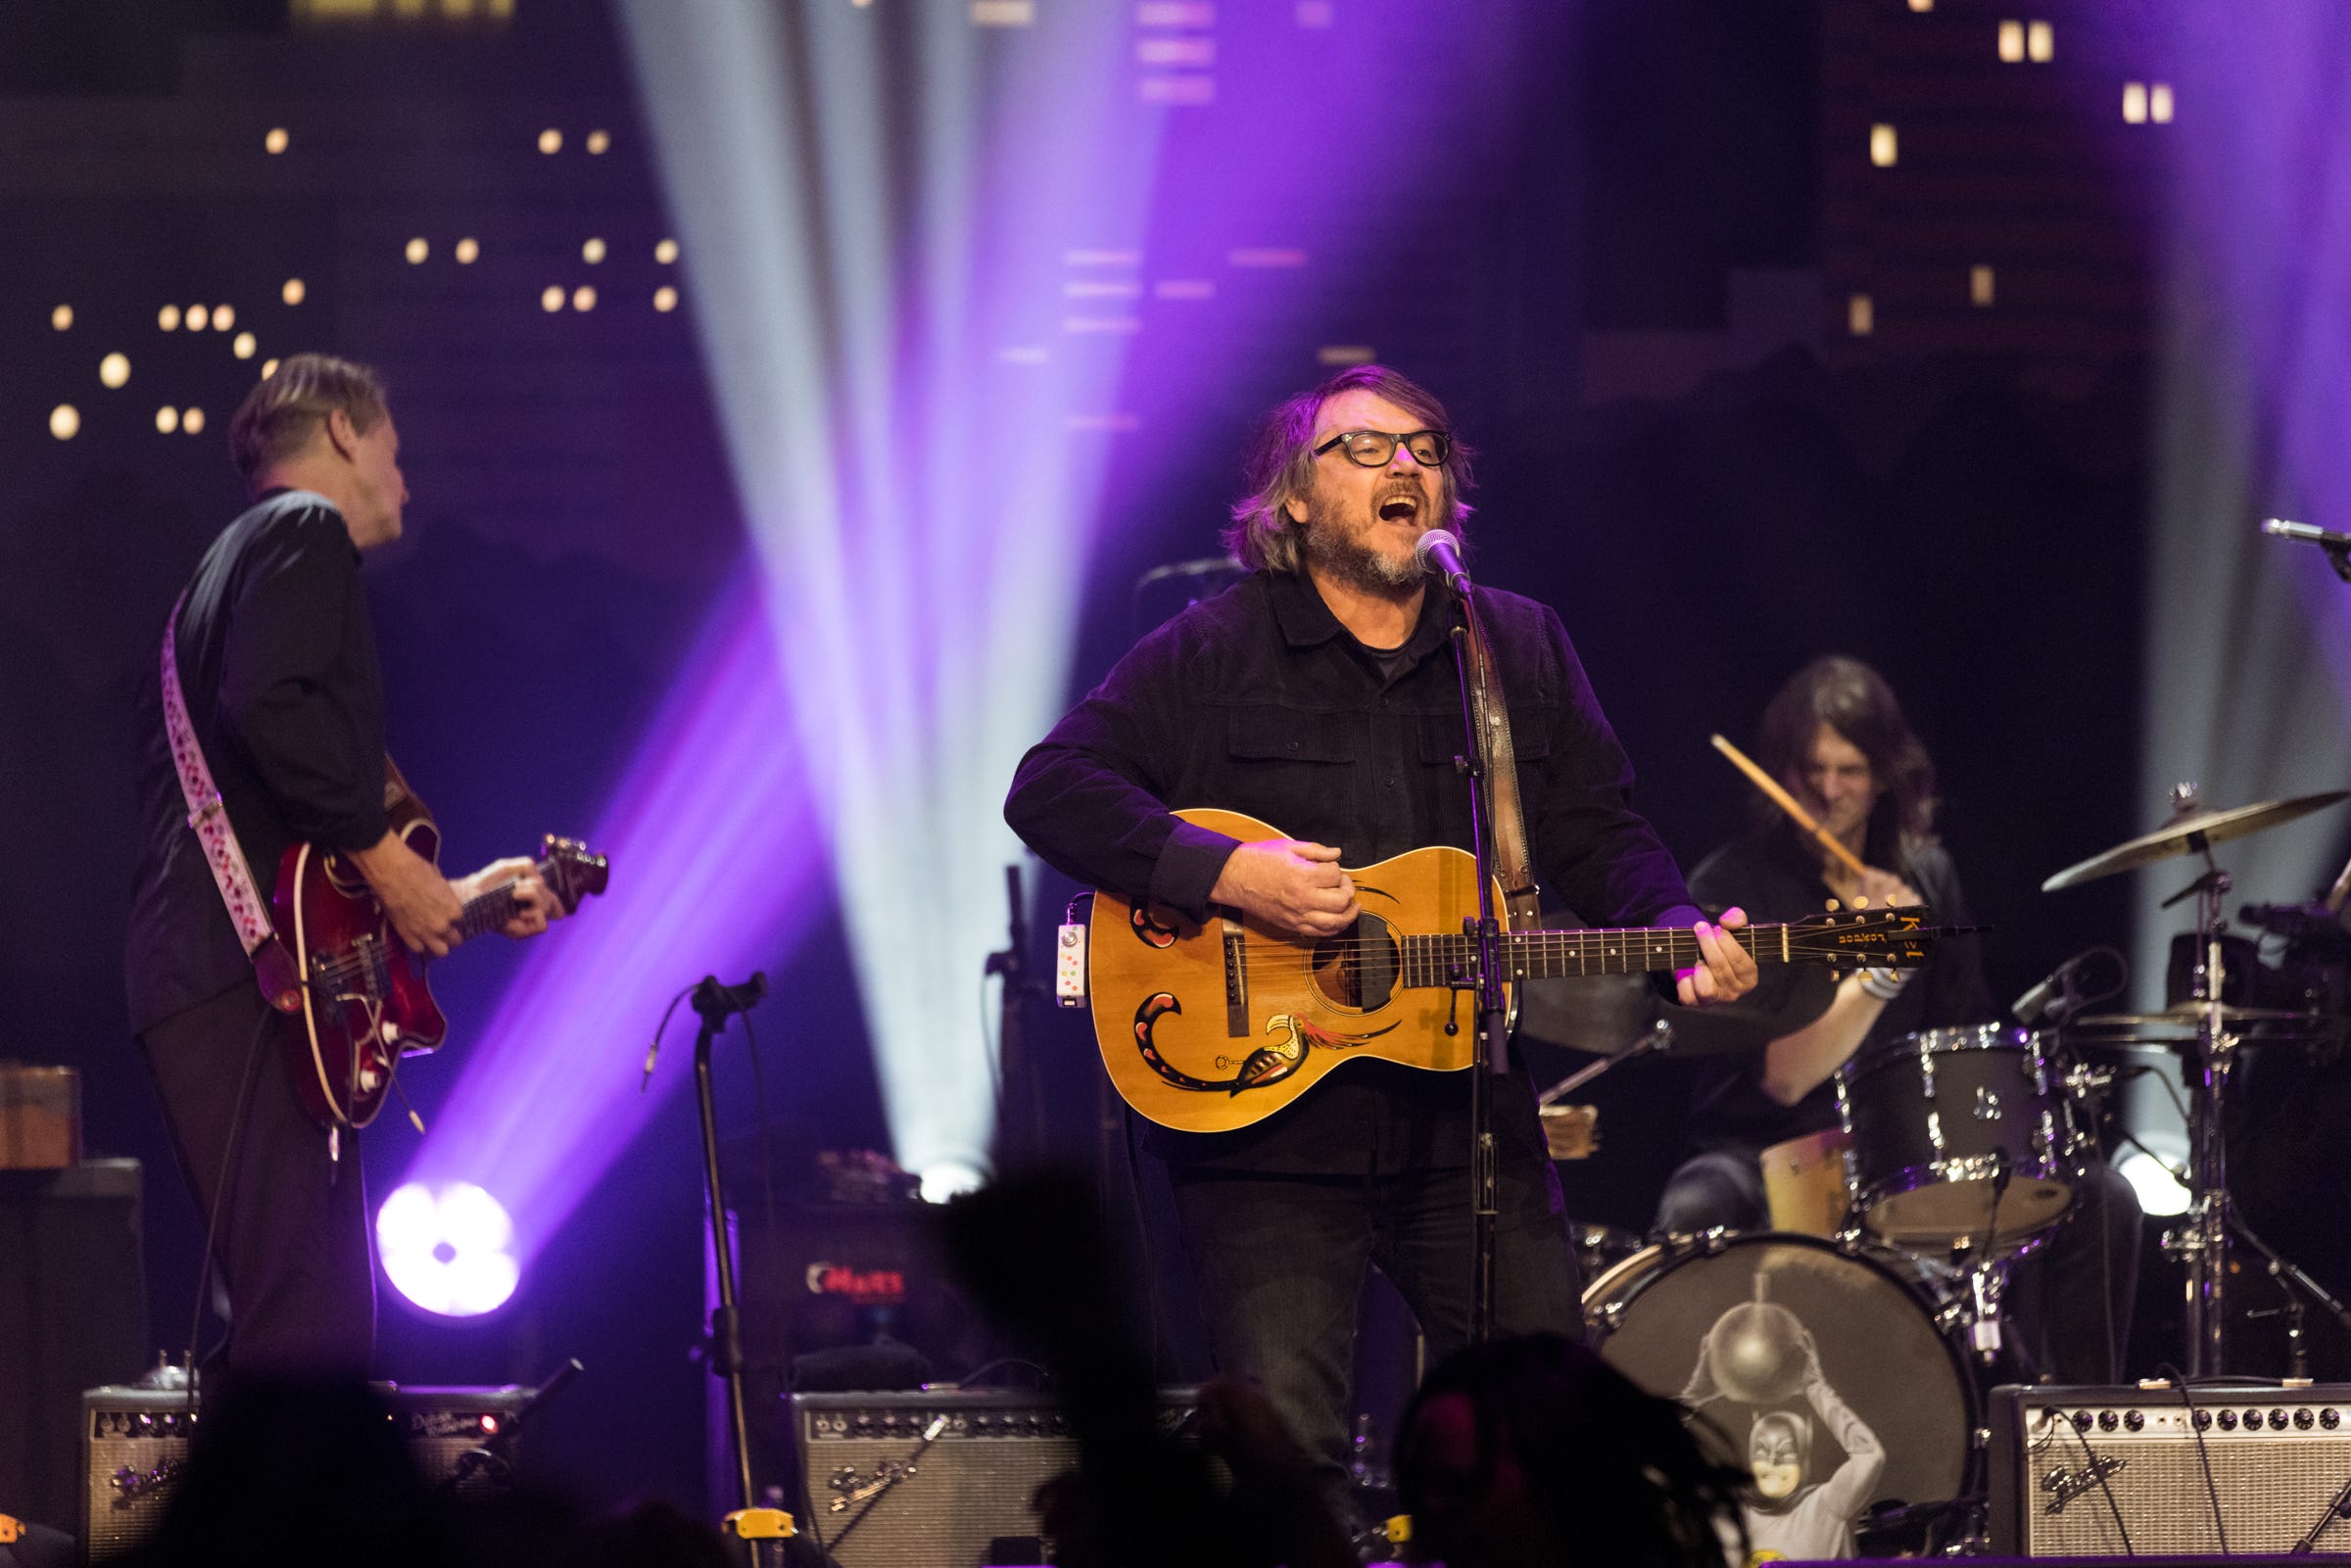 Wilco performs at the 2021 Austin City Limits Hall of Fame Induction & Celebration at the Moody Theater on Thursday October 28, 2021 (Robert Hein for American-Statesman)